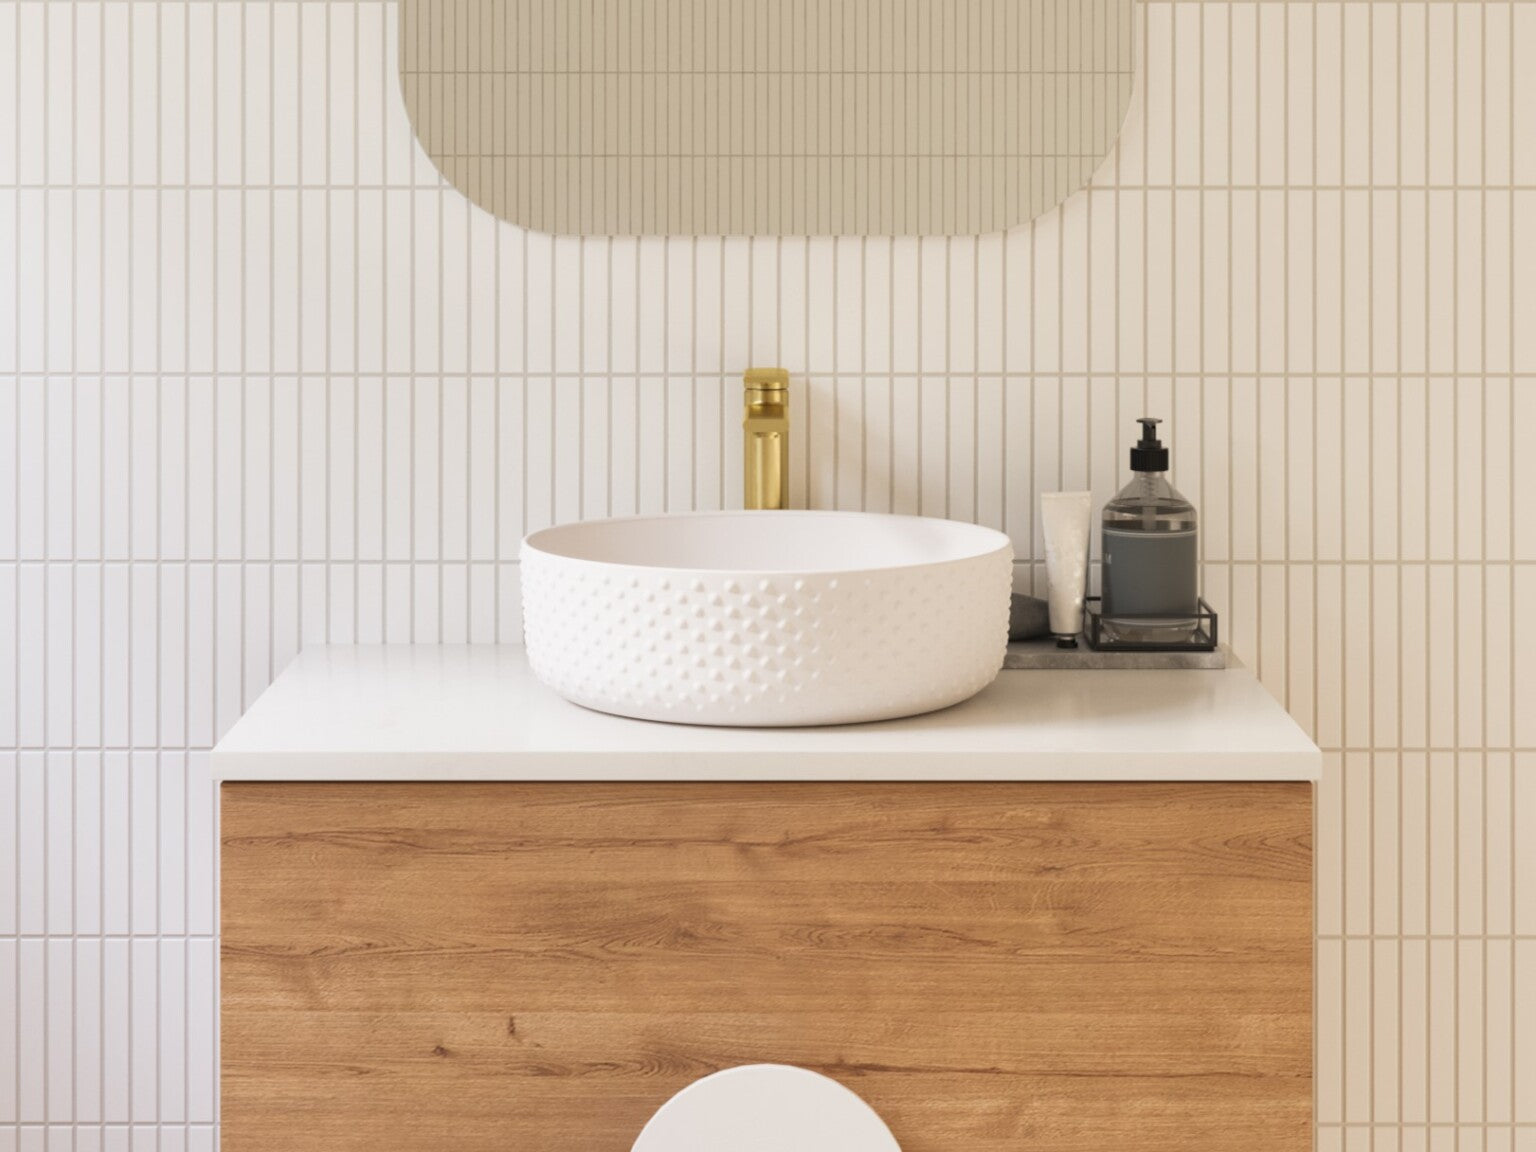 Timberline Allure Dimple Above Counter Ceramic Basin ALD-BS-360